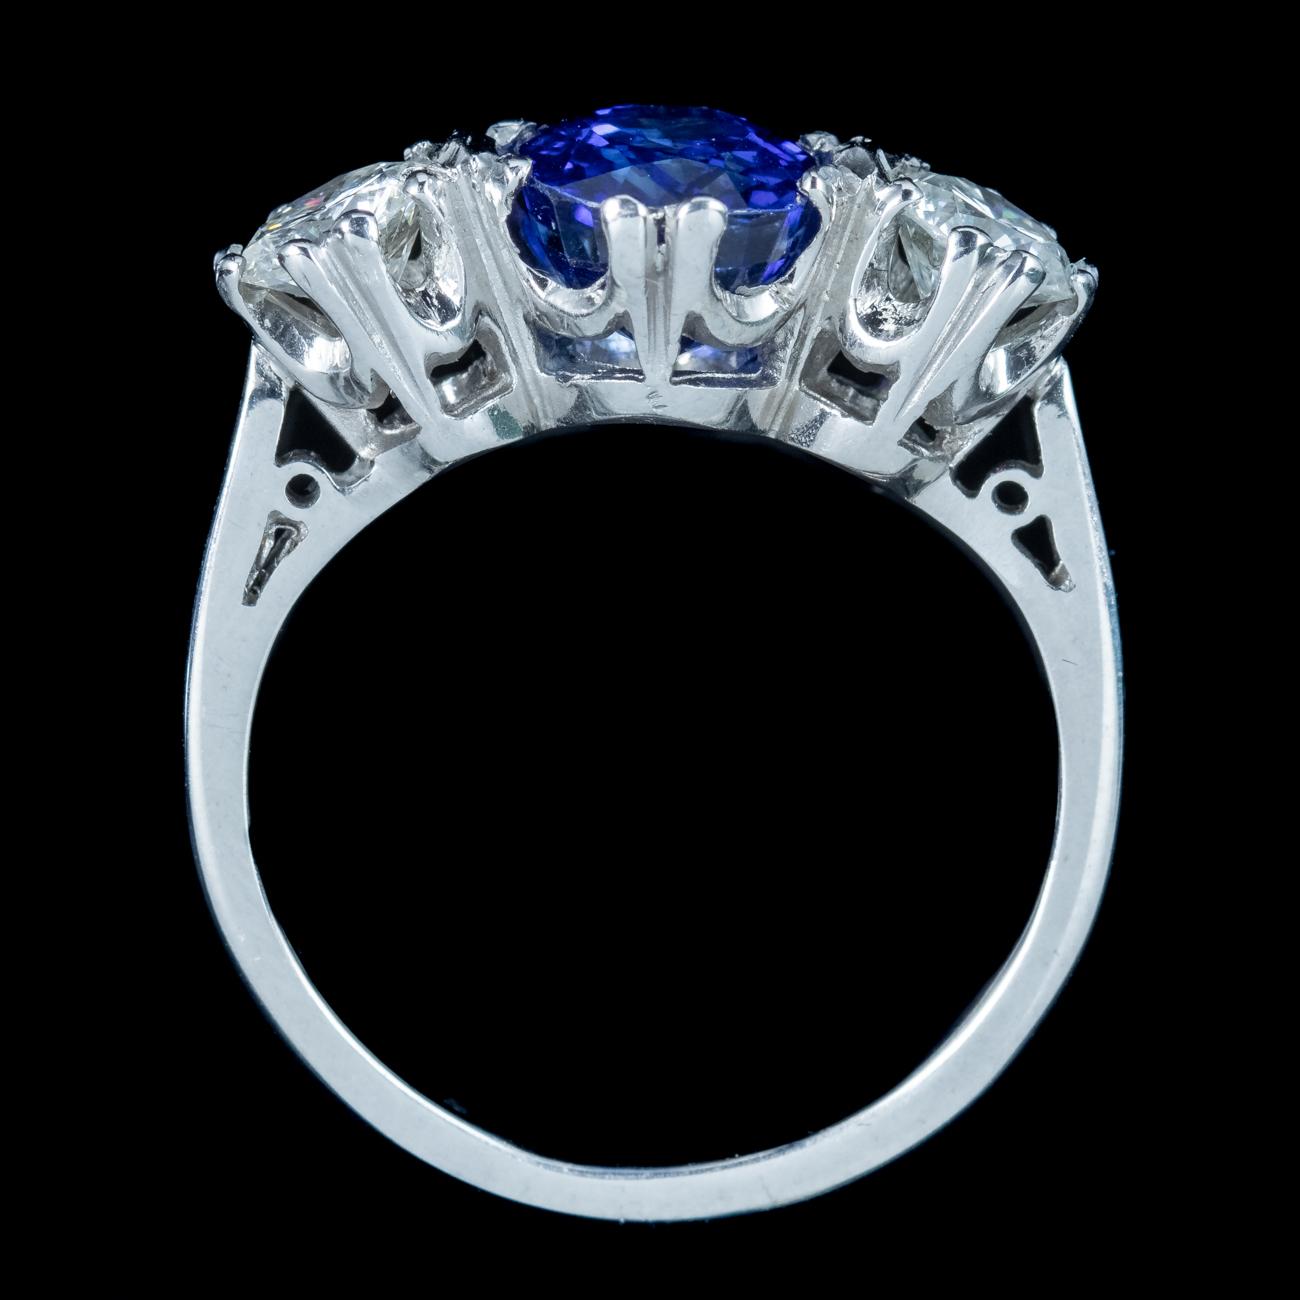 Edwardian Style Sapphire Diamond Trilogy Ring 2ct Sapphire For Sale 2